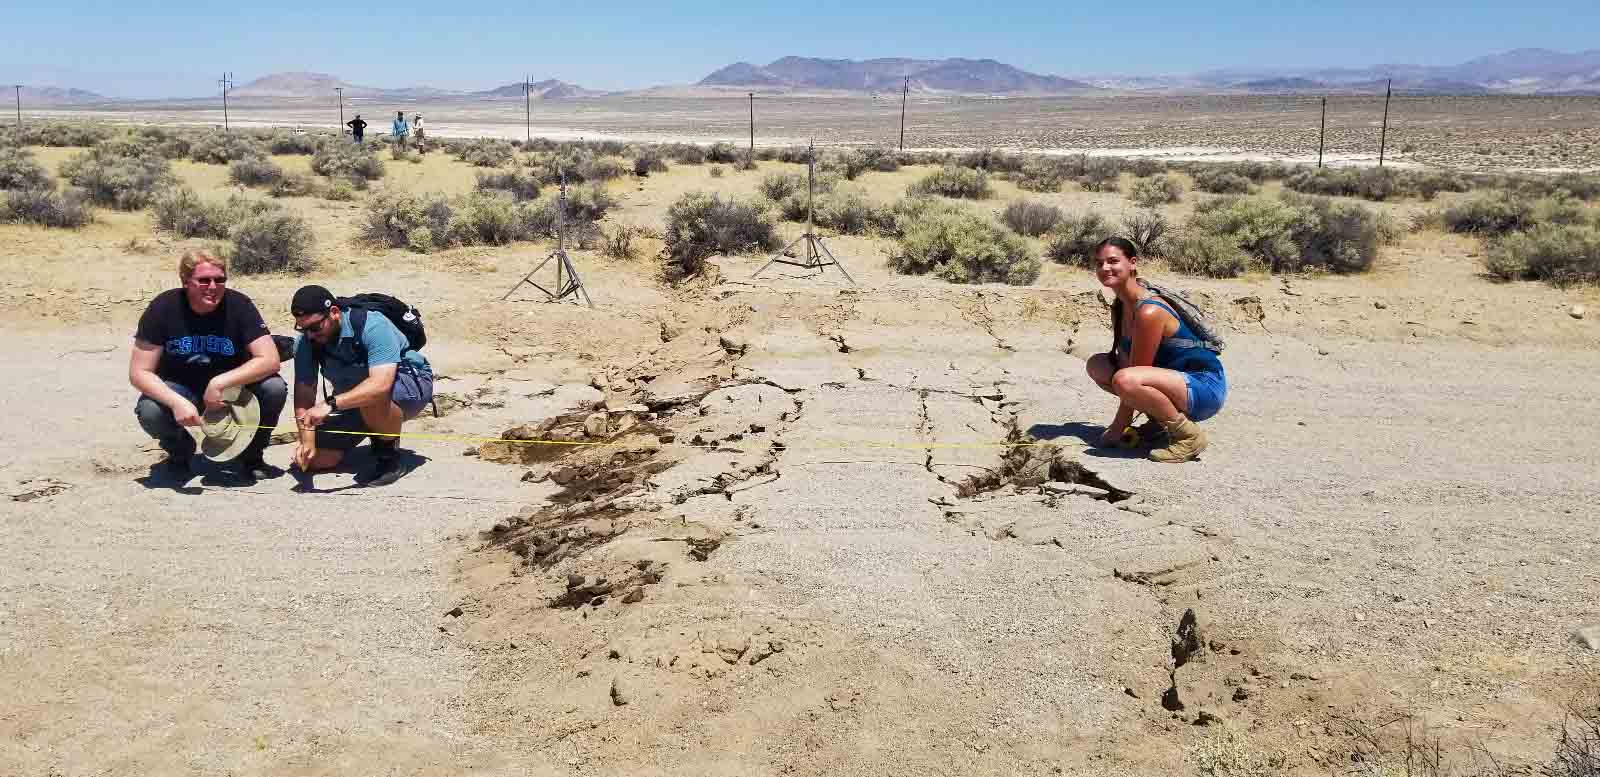 While at Highway 178, Bryan Castillo, Dylan Terry, a geological studies master’s student and volcanologist, and others took measurements, mapped the area, and took photos to gather valuable information for California Earthquake Clearinghouse, 